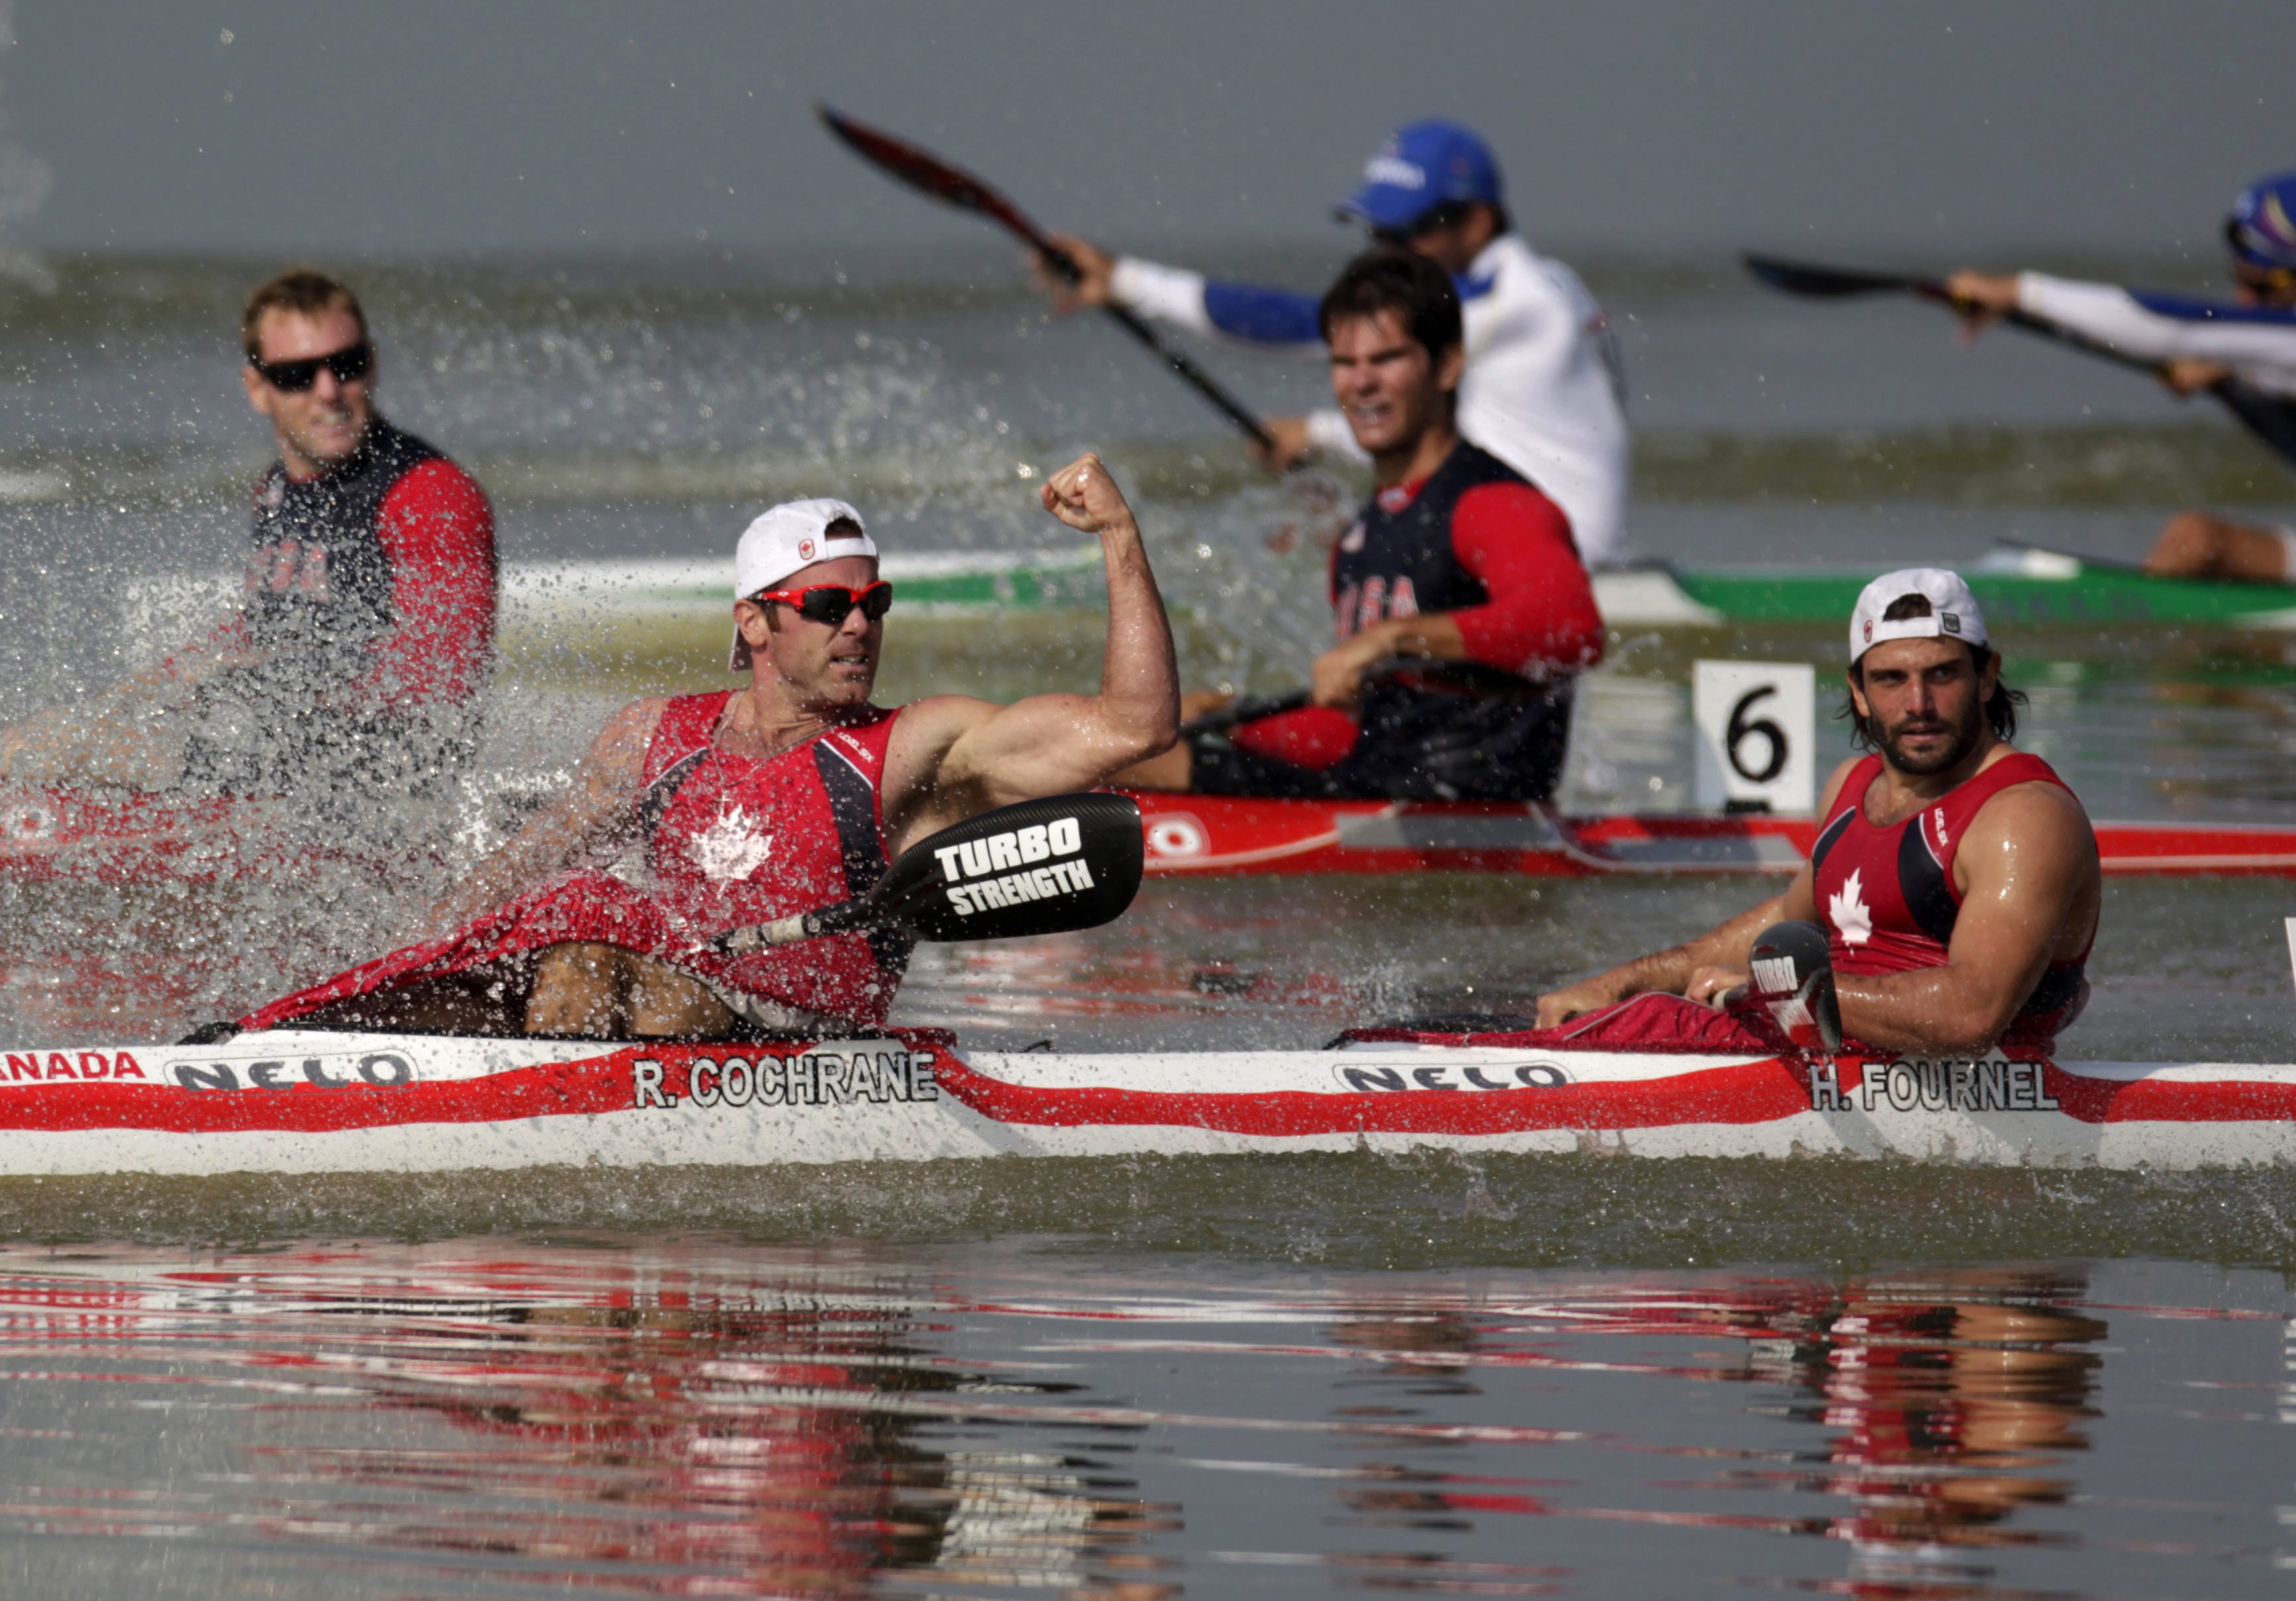 Gold medal winners Paul Cochrane, left, and Hugues Fournel from Canada cross the finish line as they win the men's double K2 200m kayak event at the Pan American Games in Ciudad Guzman, Mexico, Saturday Oct. 29, 2011. (AP Photo/Eduardo Verdugo)